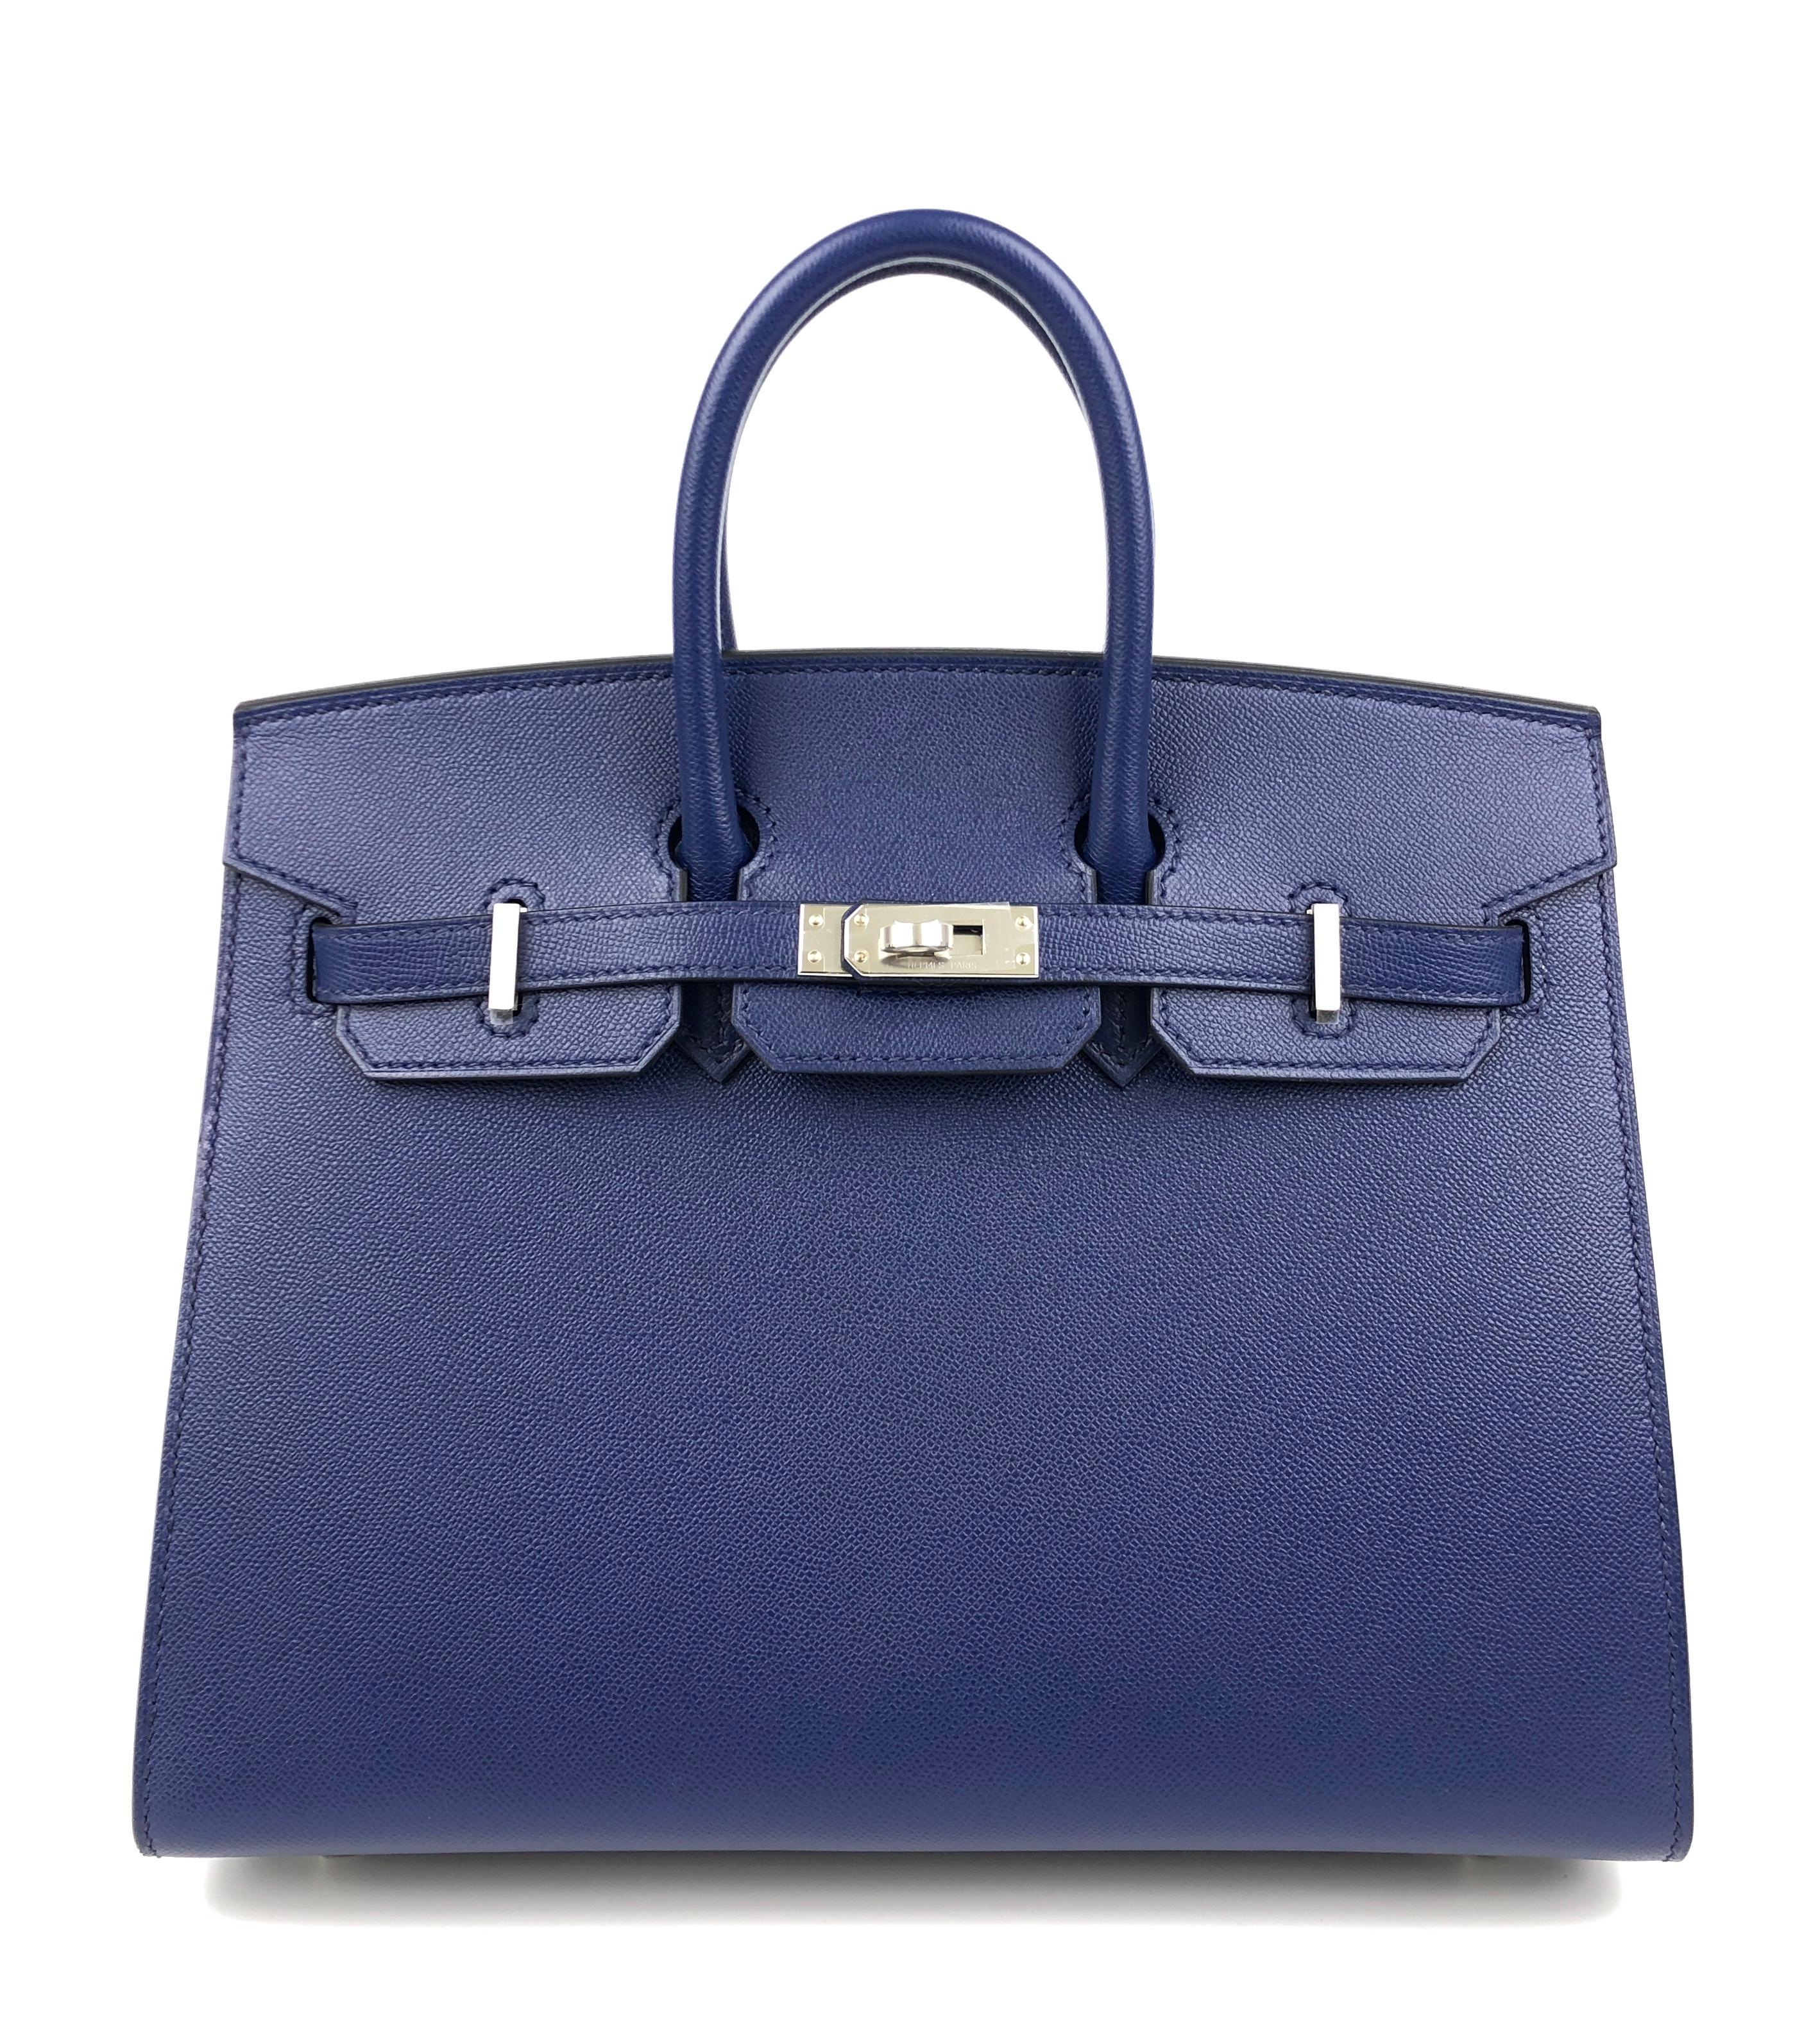 Brand New Ultra Rare Stunning Hermès Birkin 25 Sellier Madame Leather Blue Sapphire Palladium Hardware. Z Stamp 2021 Full Set. 

Shop with Confidence from Lux Addicts. Authenticity Guaranteed! 
